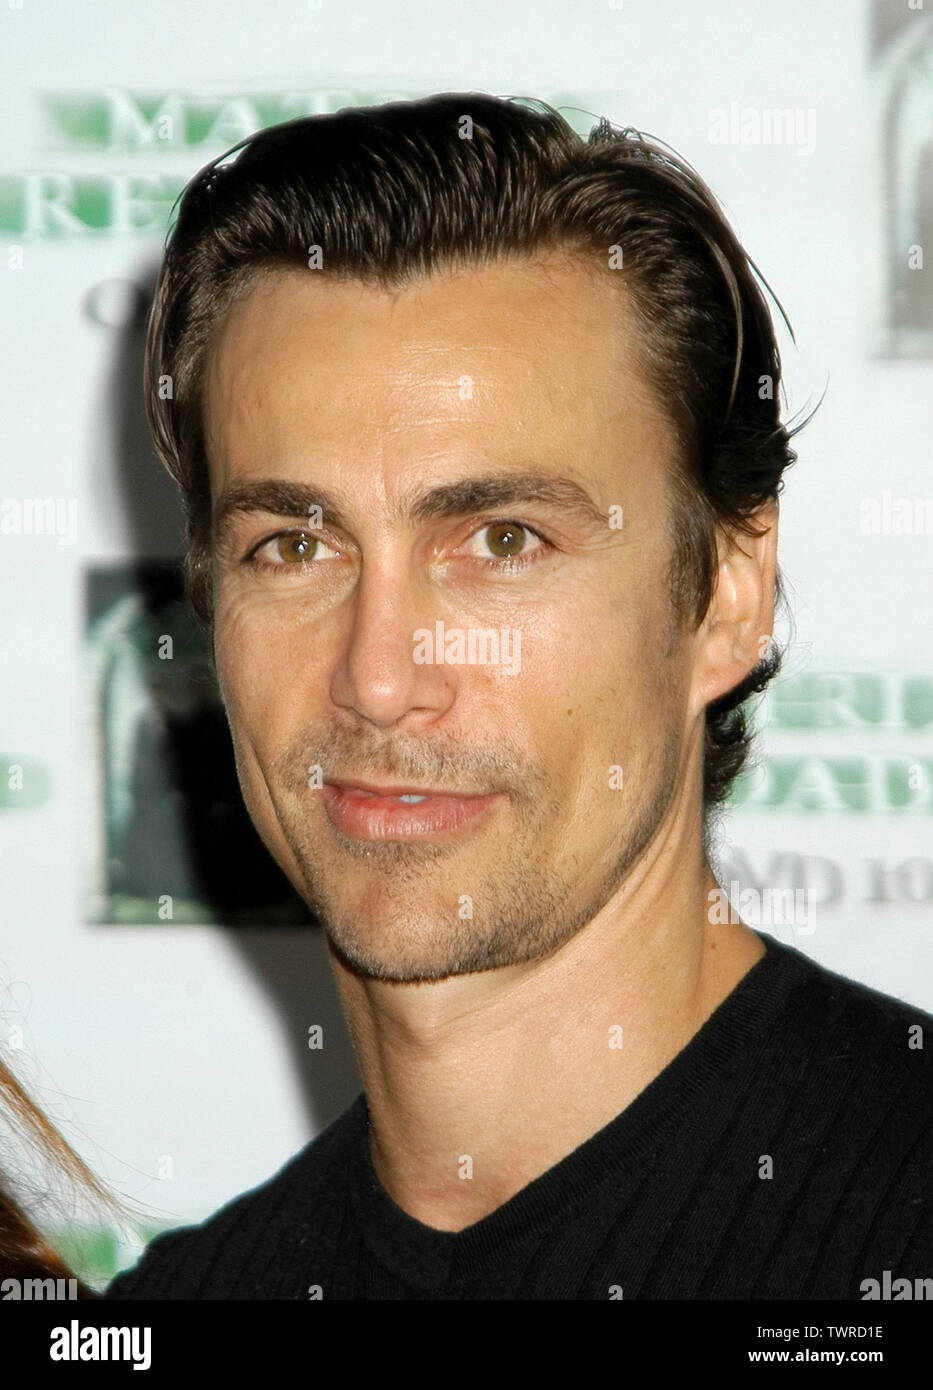 Daniel Bernhardt at the 'The Matrix Reloaded' Worldwide DVD Launch at Morton's in West Hollywood, CA. The event took place on Wednesday, October 8, 2003.  Photo credit: SBM / PictureLux File Reference # 33790-2503SMBPLX  For Editorial Use Only -  All Rights Reserved Stock Photo